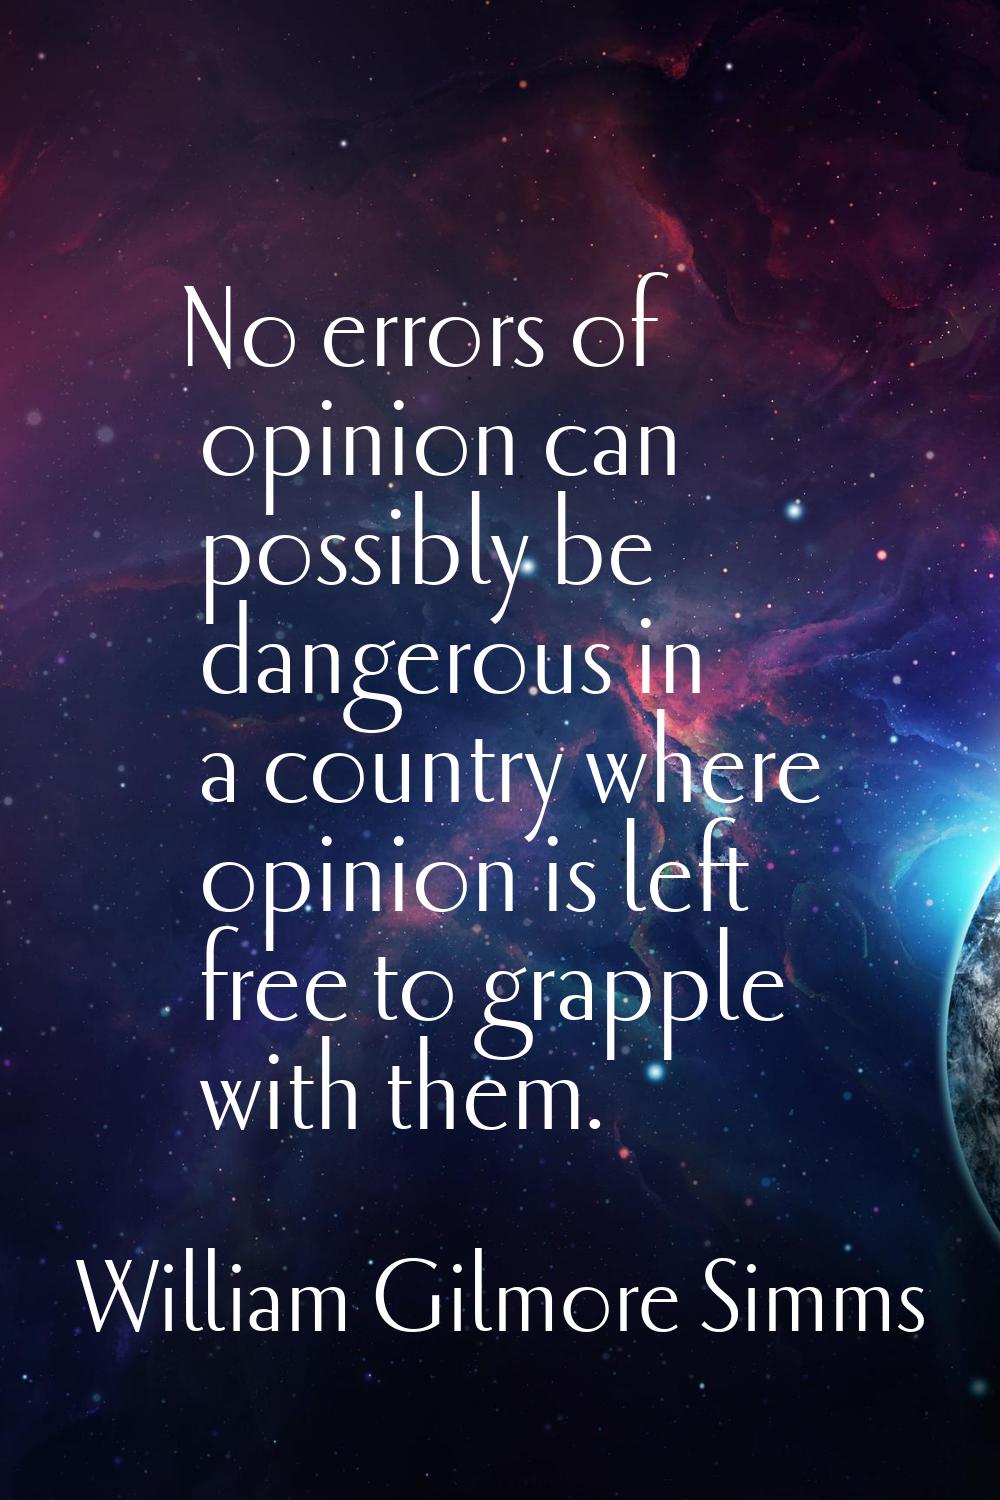 No errors of opinion can possibly be dangerous in a country where opinion is left free to grapple w